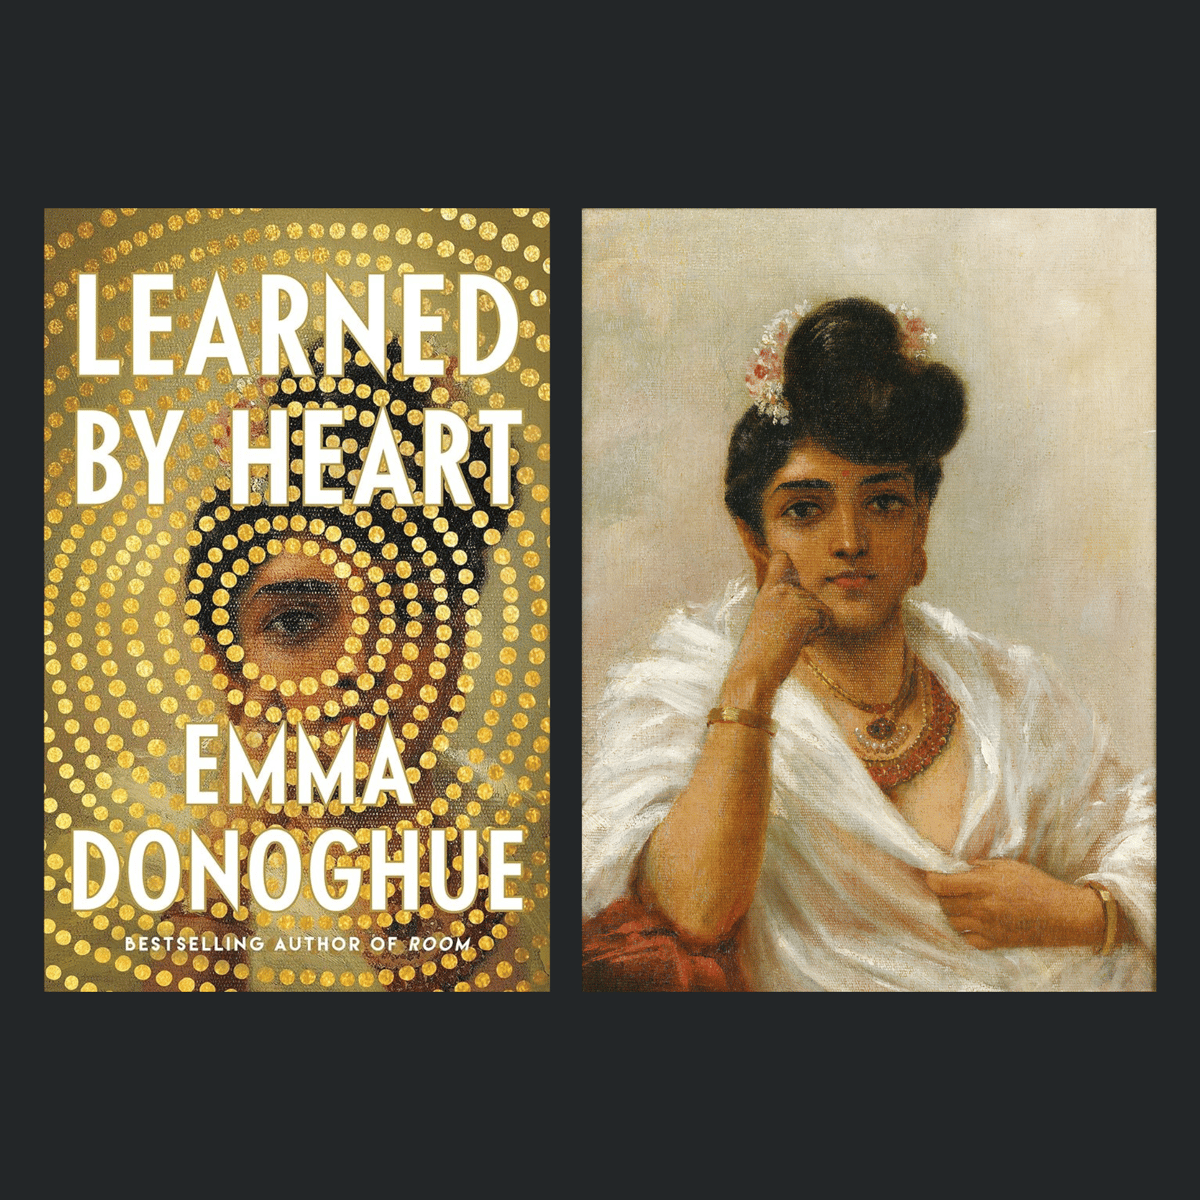 Lucy Kim - Learned by Heart by Emma Donoghue. Published by HarperCollins Canada, Canada. 